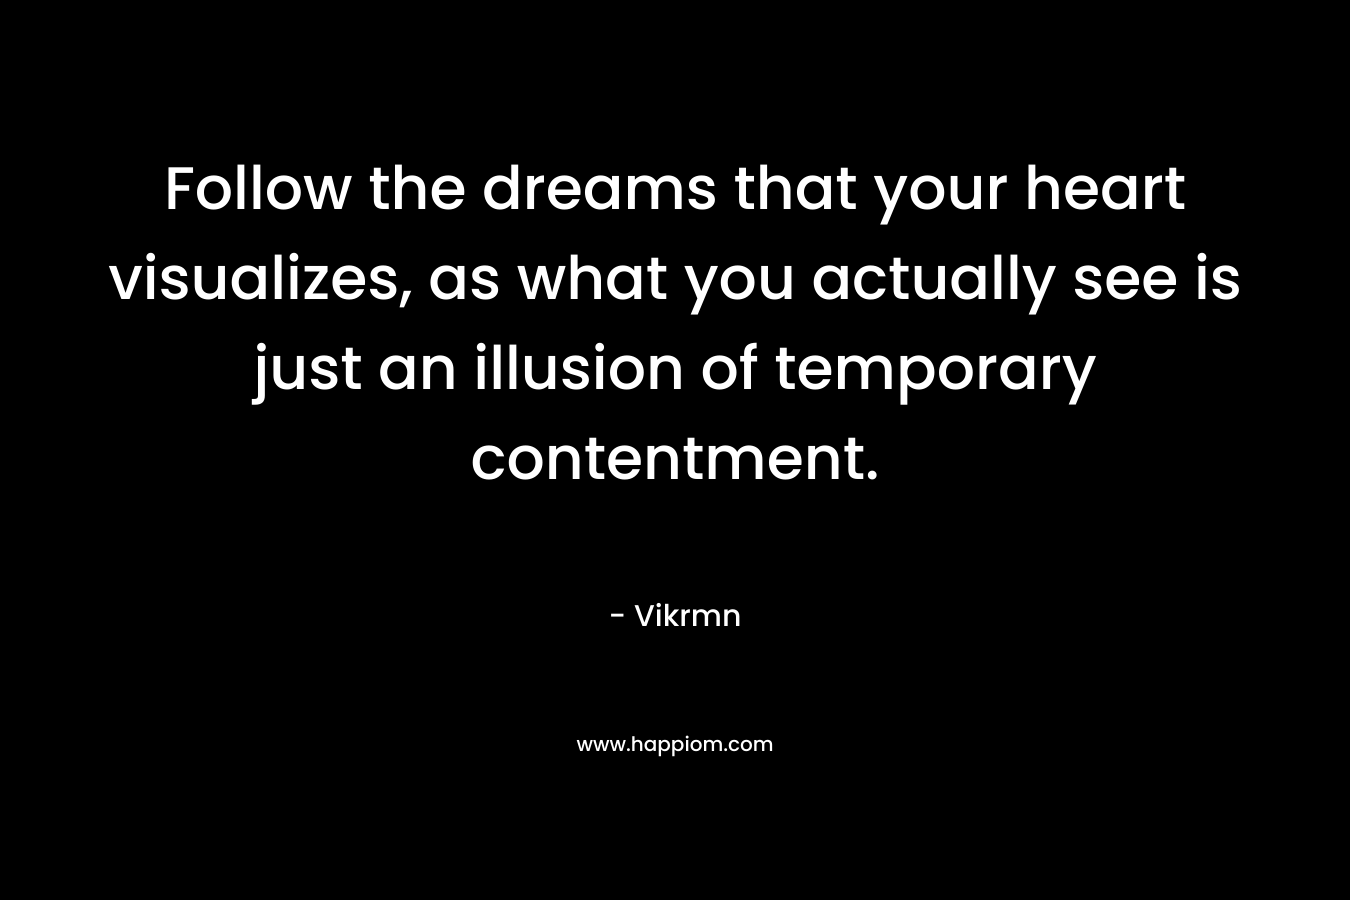 Follow the dreams that your heart visualizes, as what you actually see is just an illusion of temporary contentment.